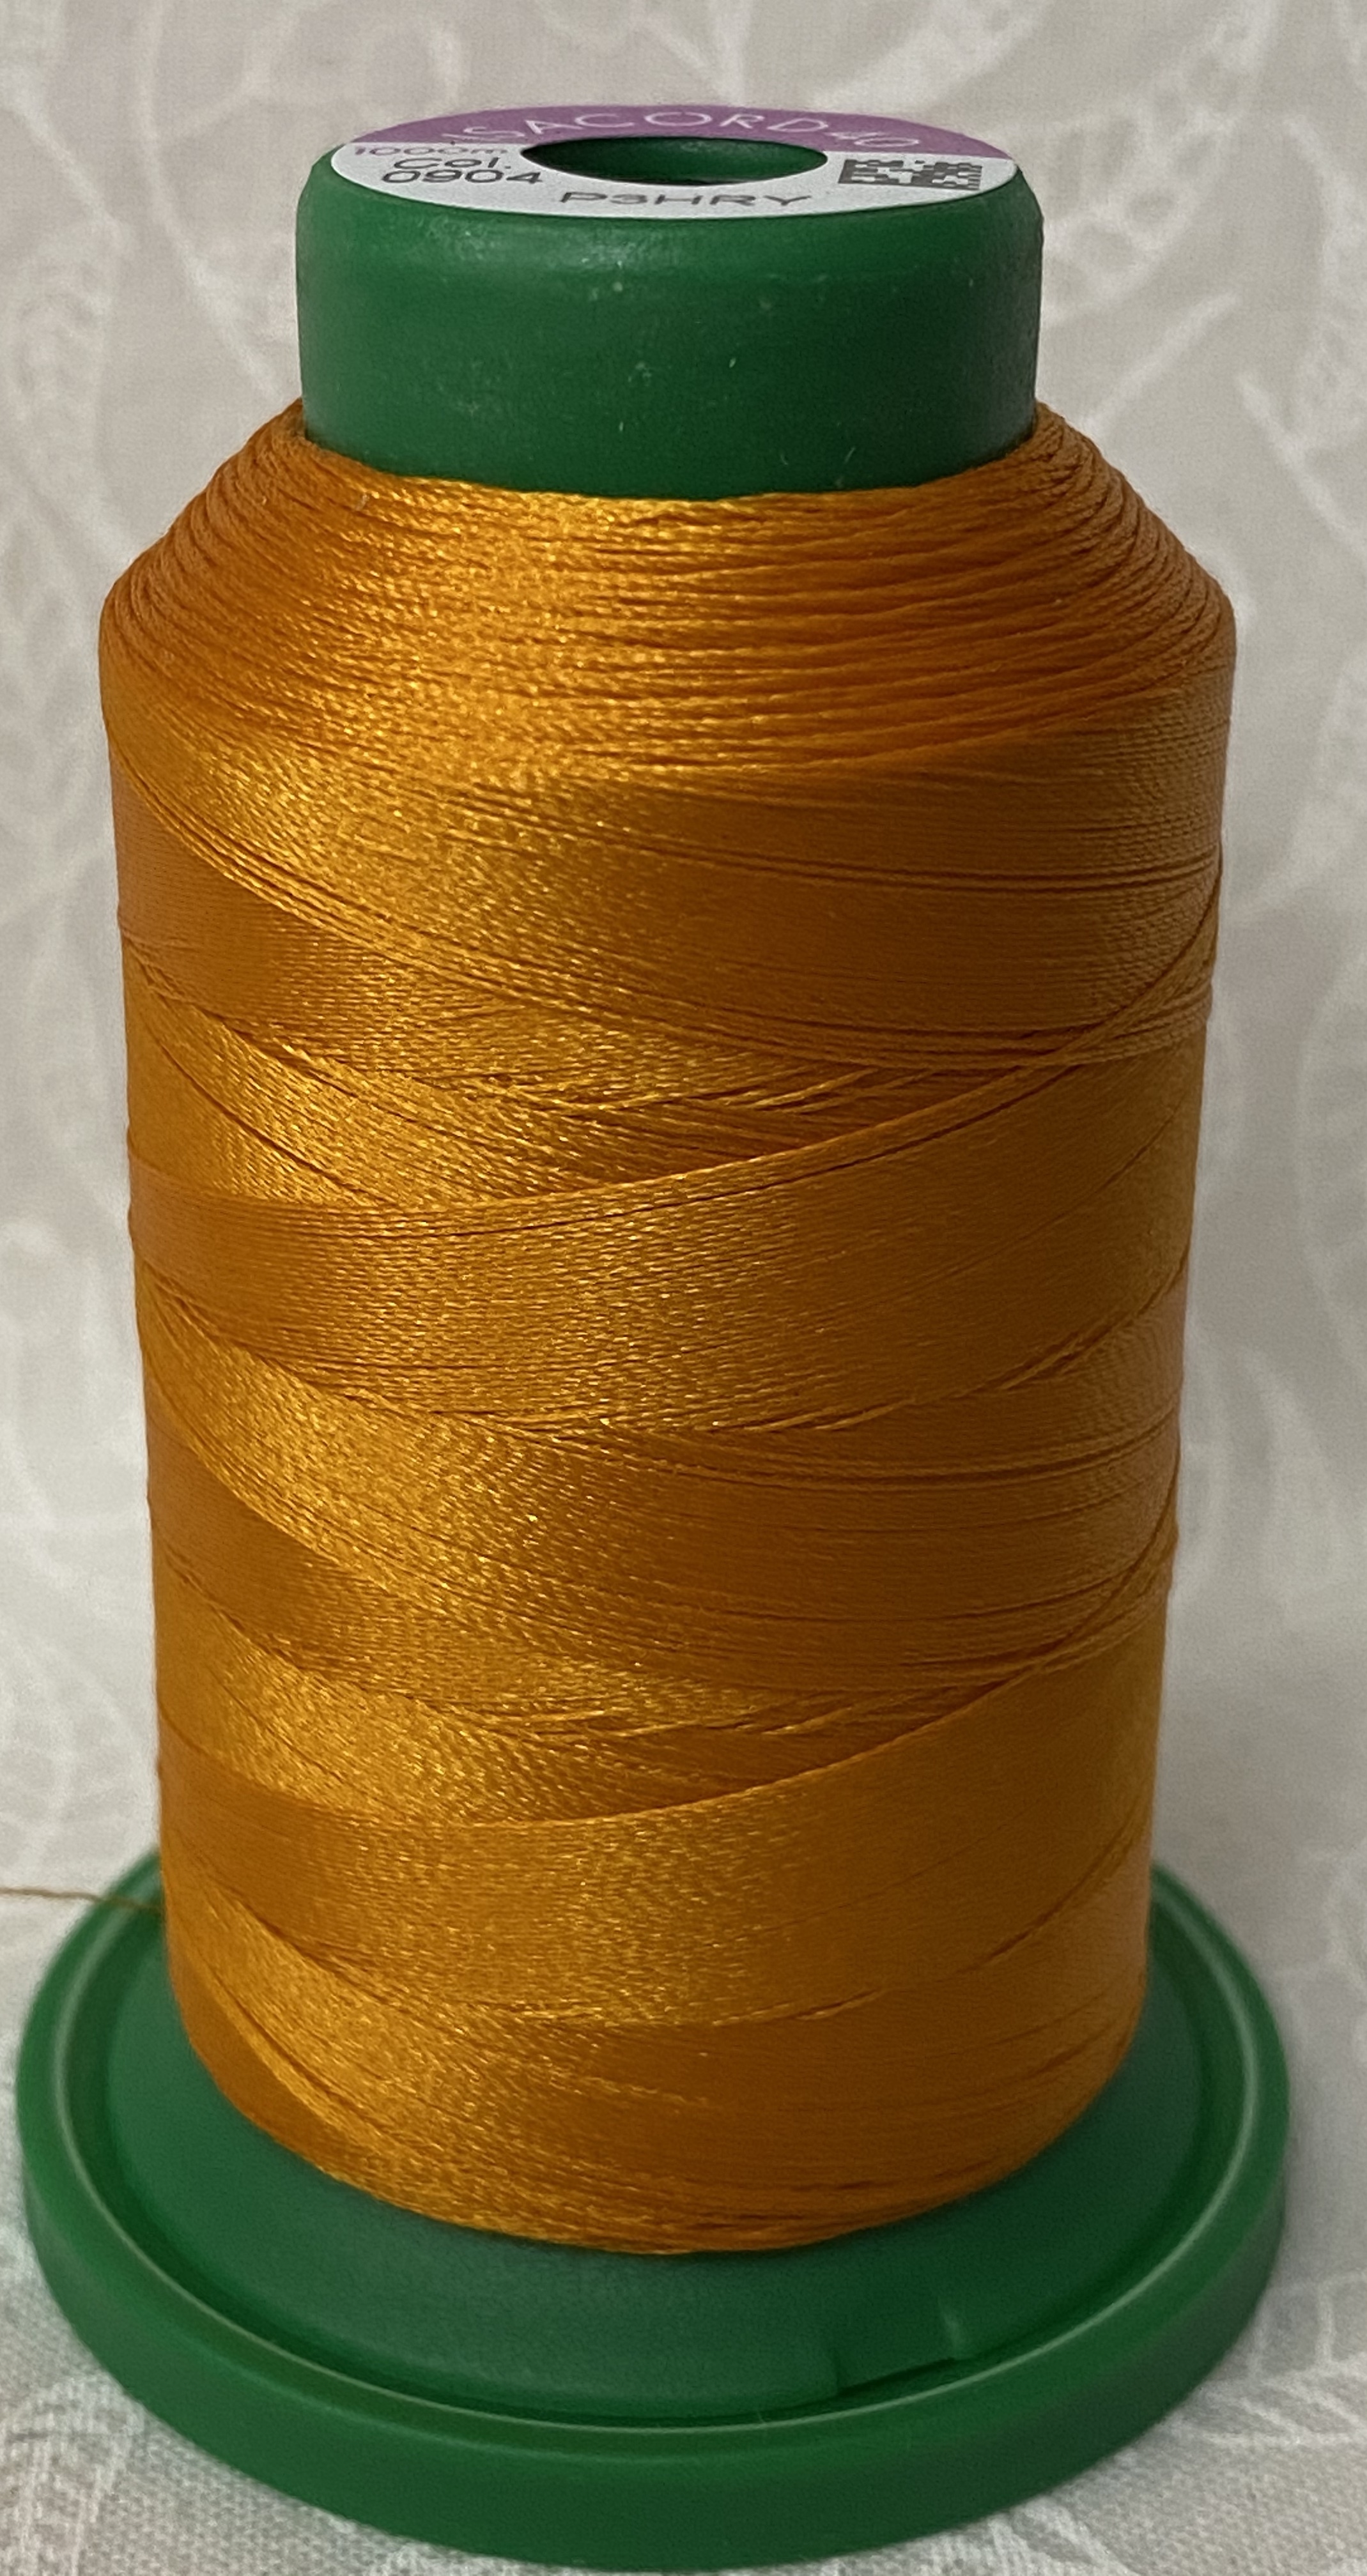 Isacord 40 Trilobal Polyester Embroidery Thread 40 wt 1000M Yellow Gold Colors 